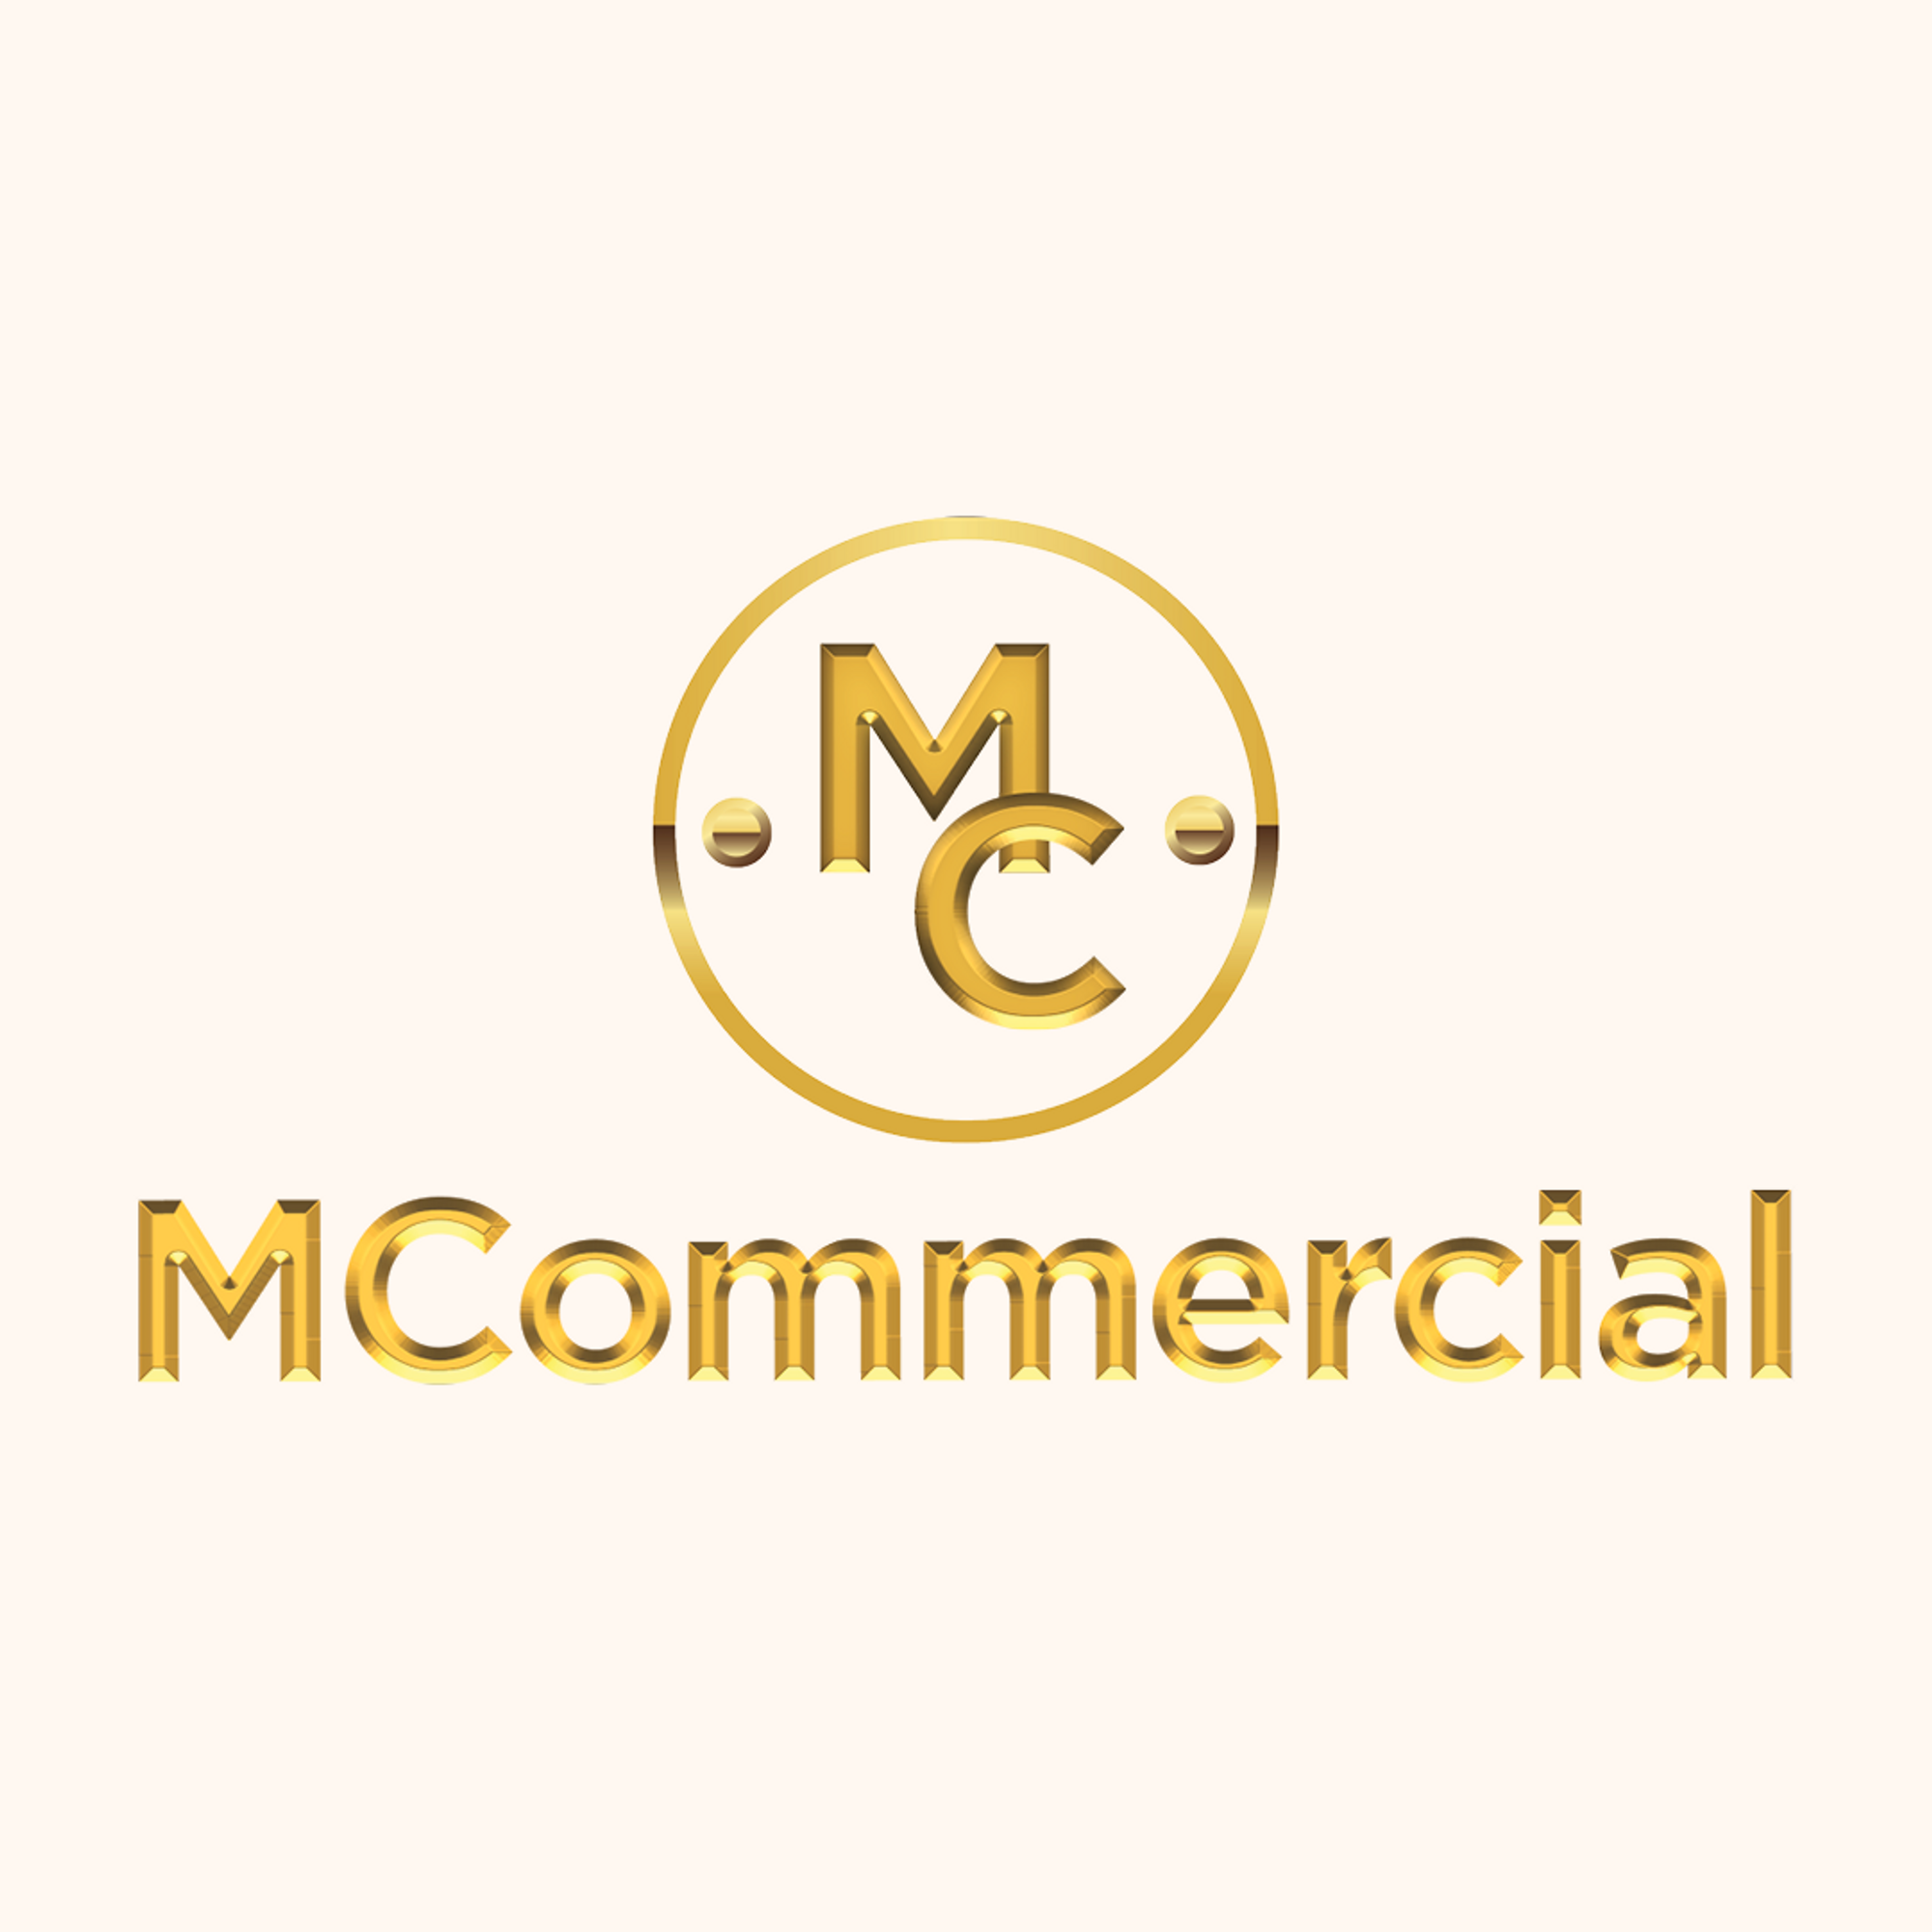 MCommercial